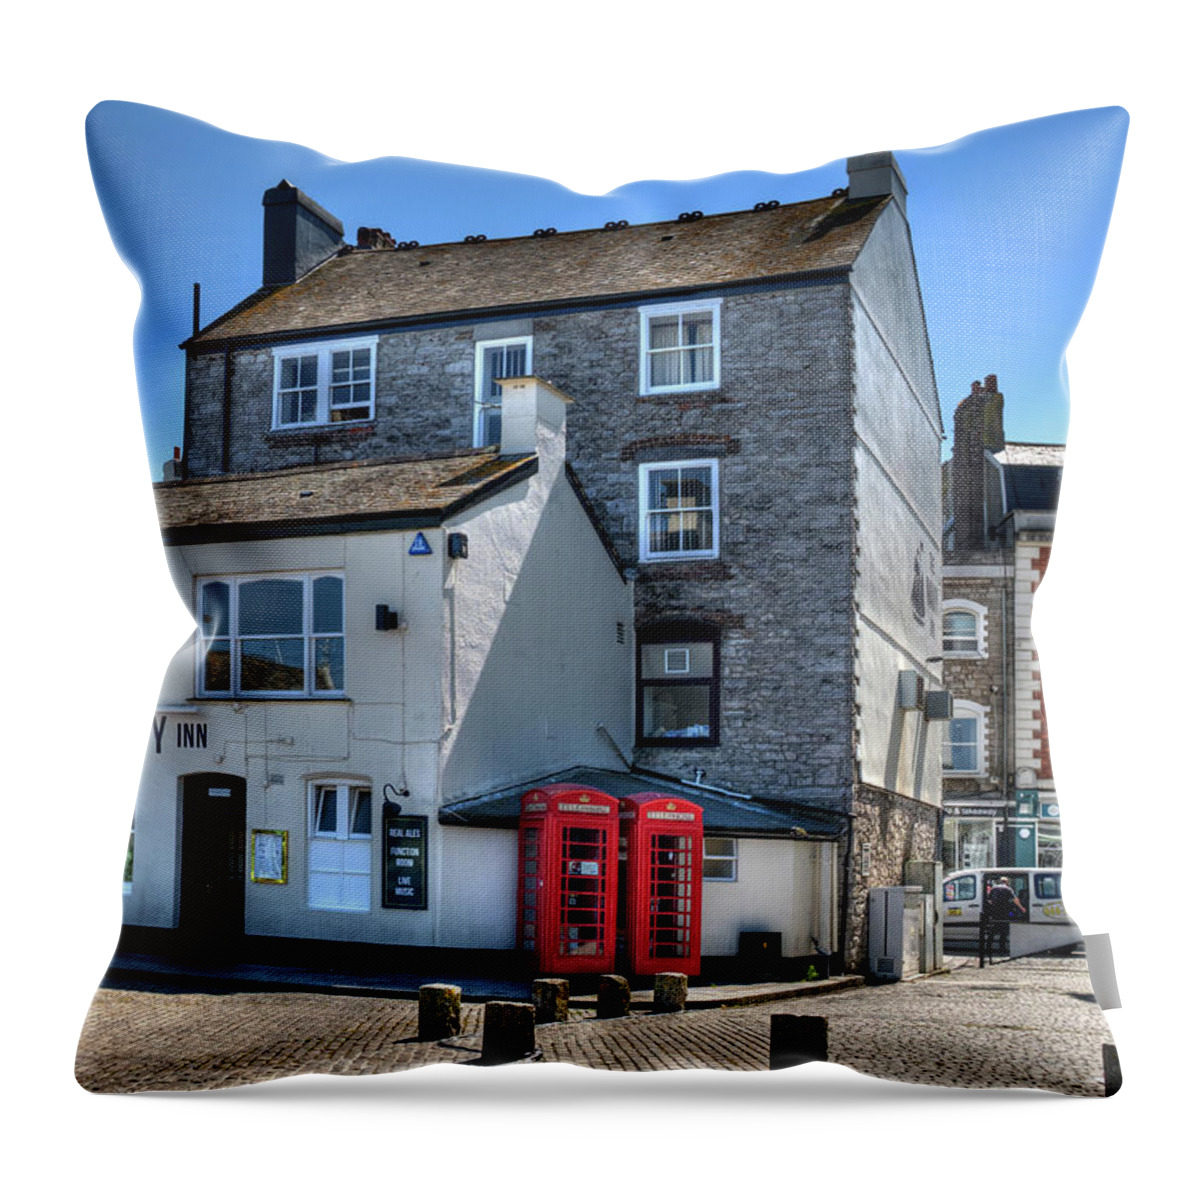 Barbican Throw Pillow featuring the photograph Old Barbican House by Doug Matthews